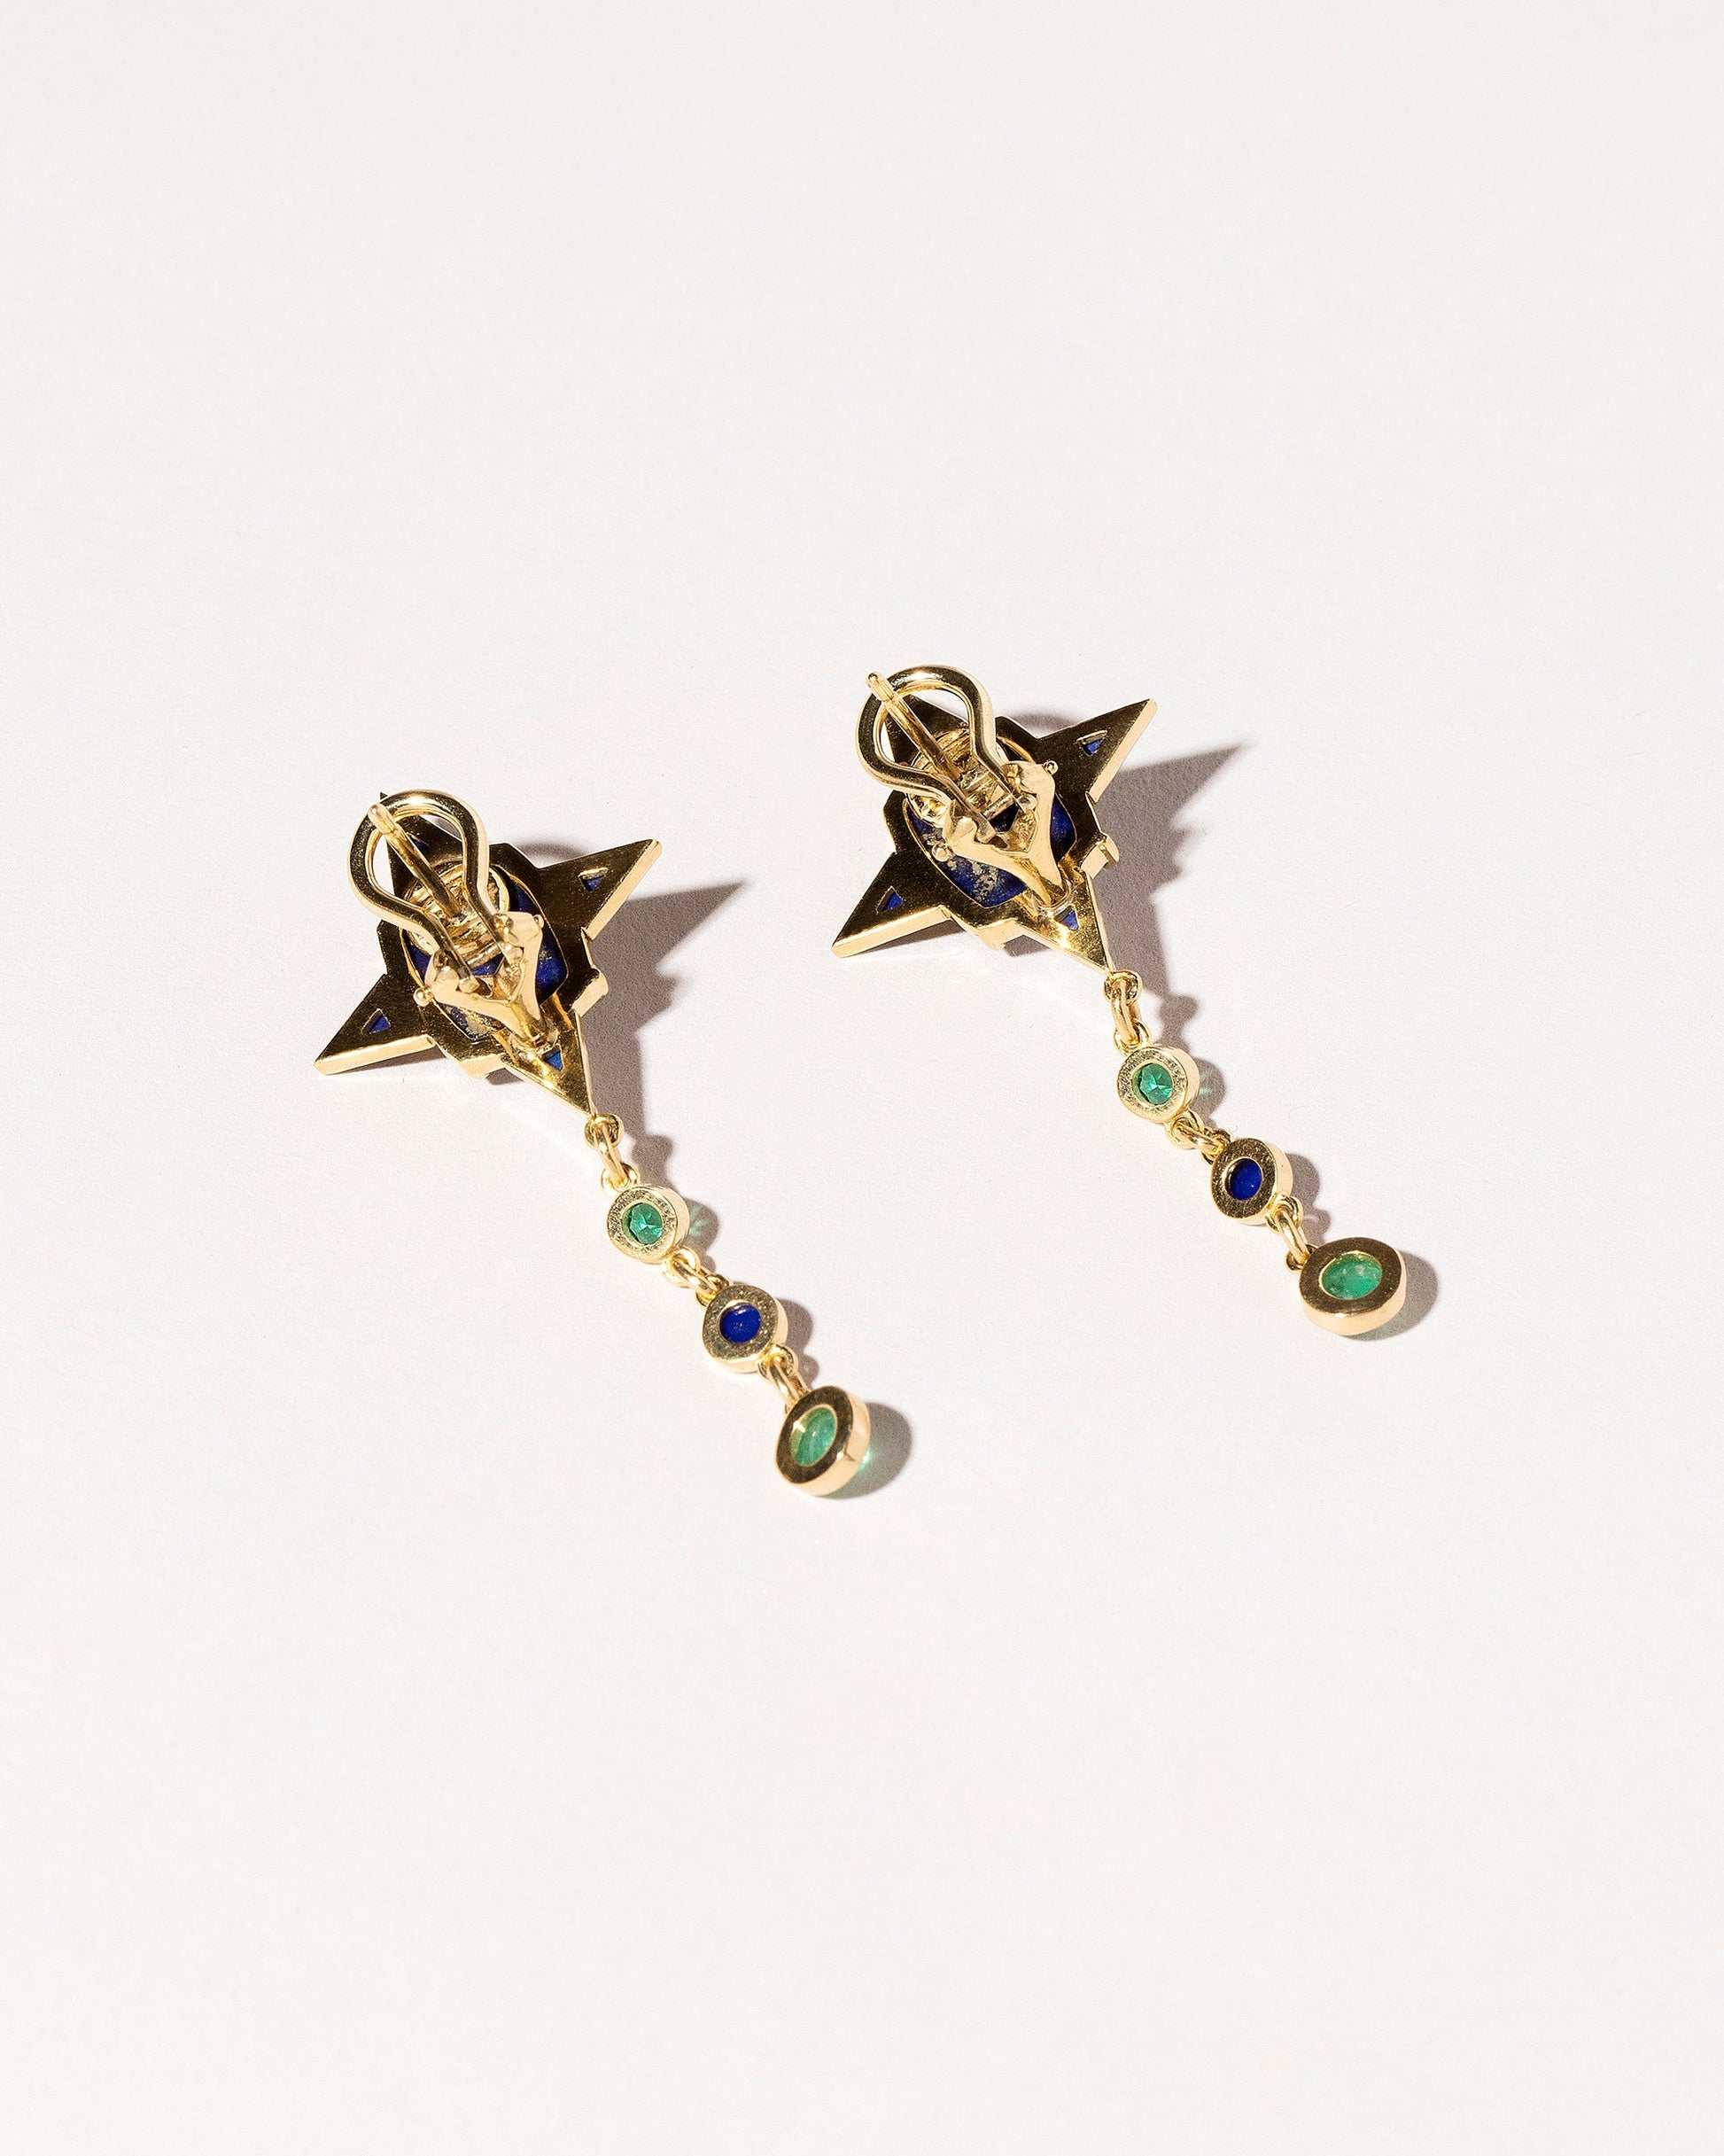  Lapis & Emerald Drop Earrings on light color background